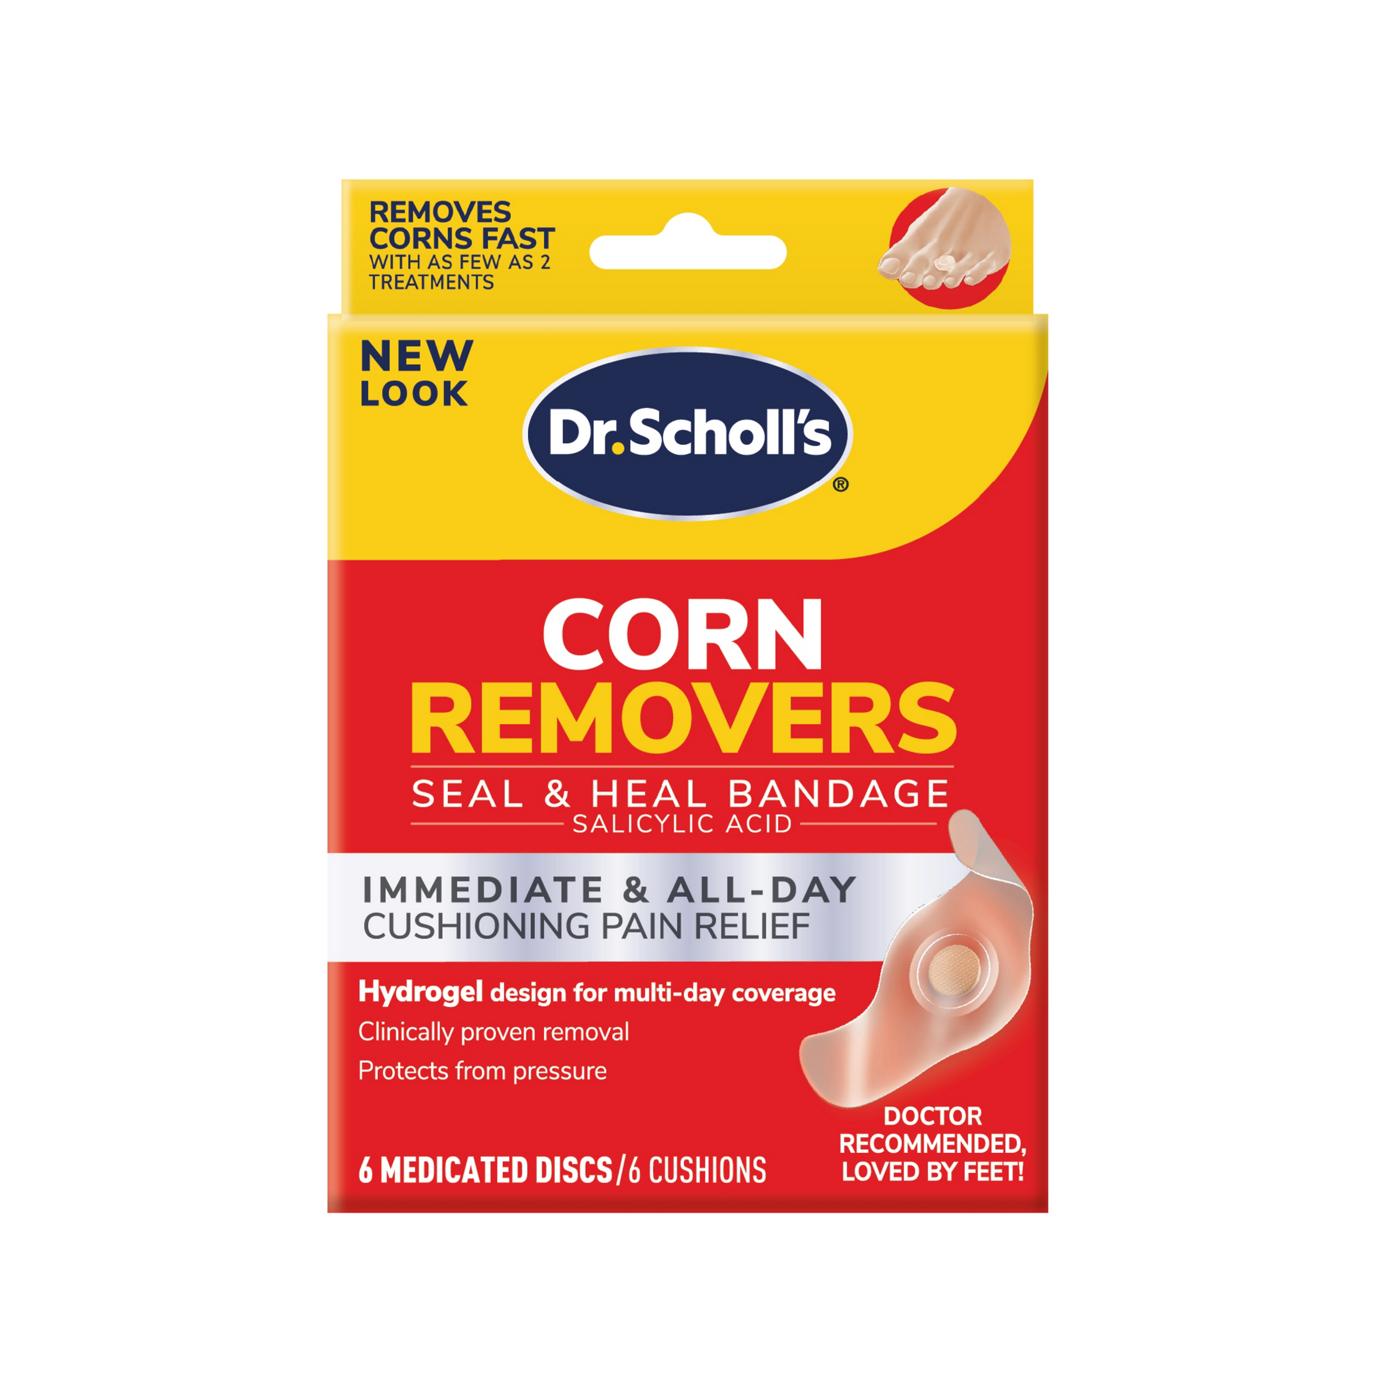 Dr. Scholl's Corn Removers; image 1 of 9